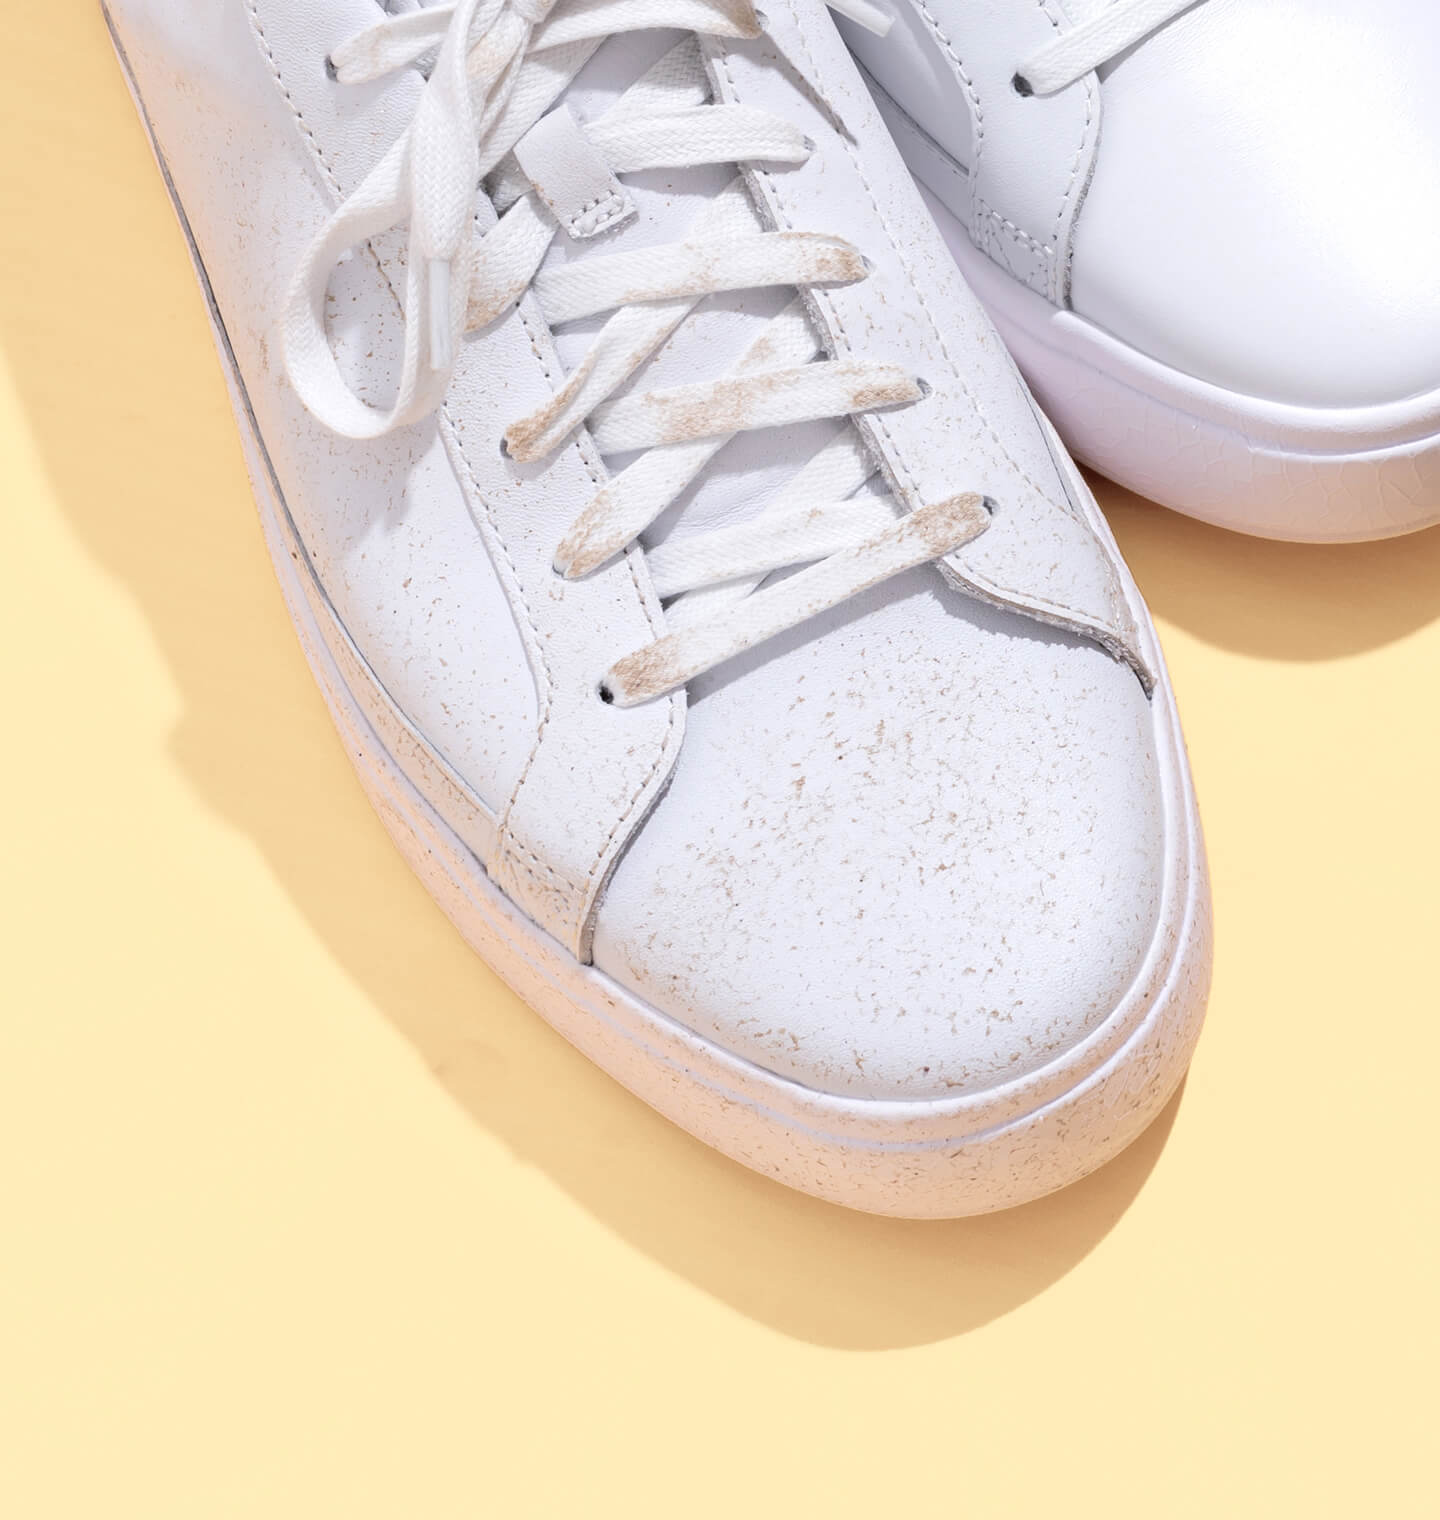 7 Easy Ways to Get Dirt Out of White Shoes  Cleaning white canvas shoes,  White gym shoes, White shoes